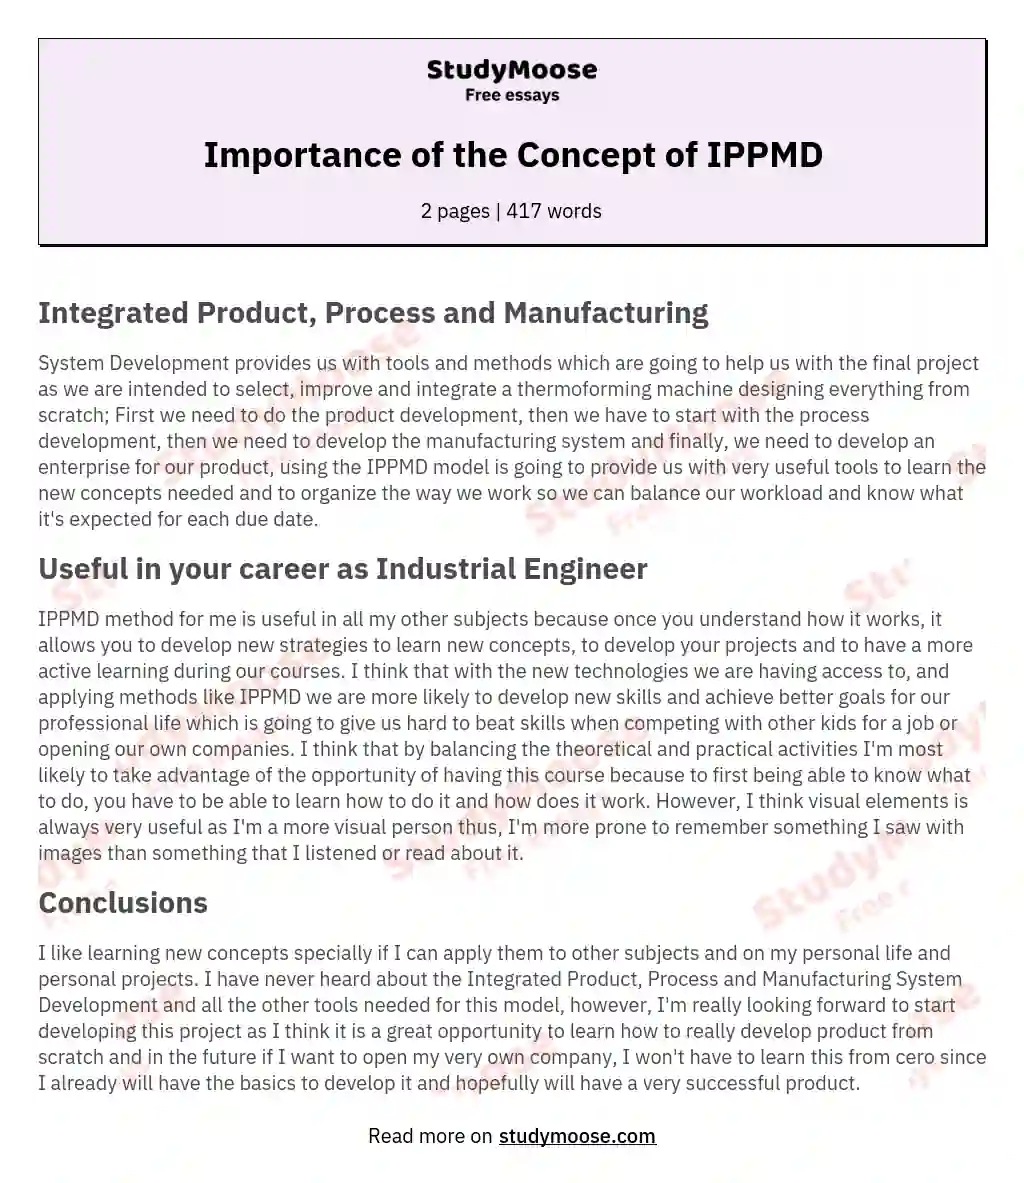 Importance of the Concept of IPPMD essay